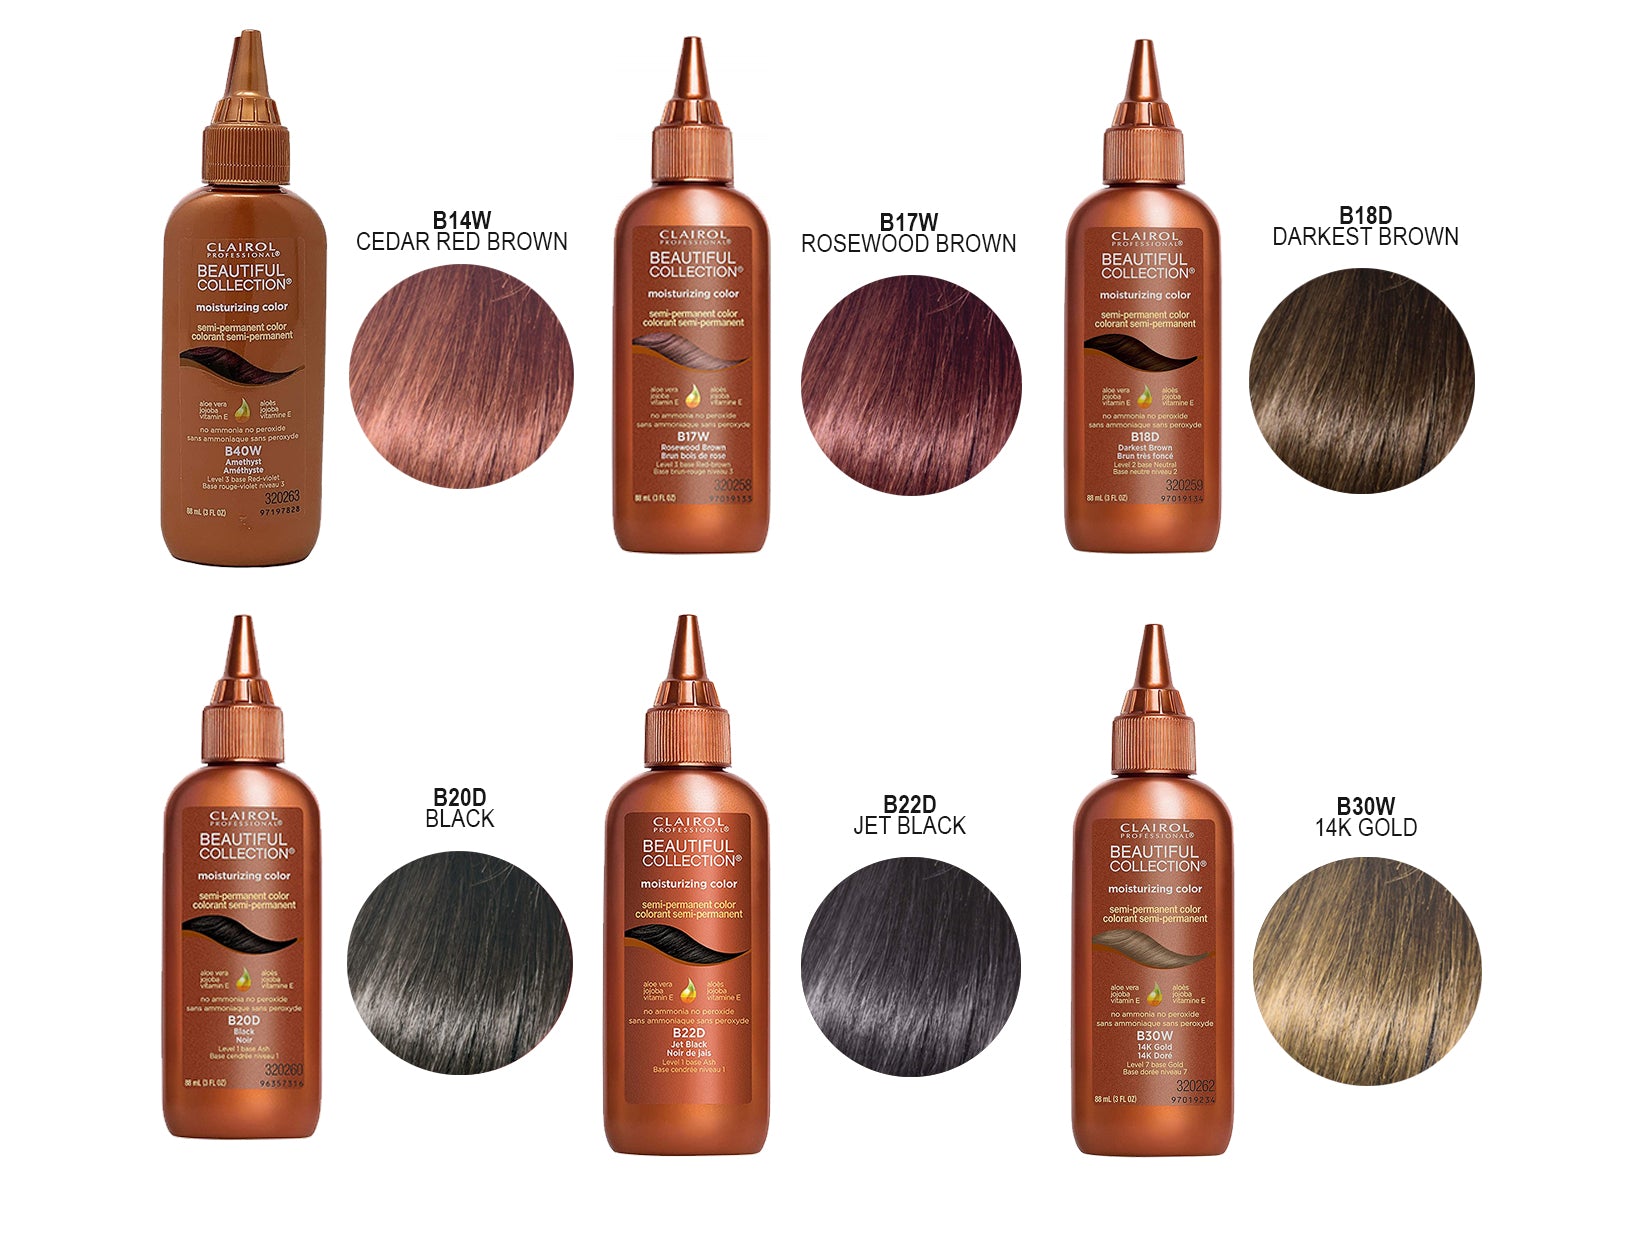 8. "Clairol Natural Instincts Semi-Permanent Hair Color, 9 Light Blonde" - wide 5